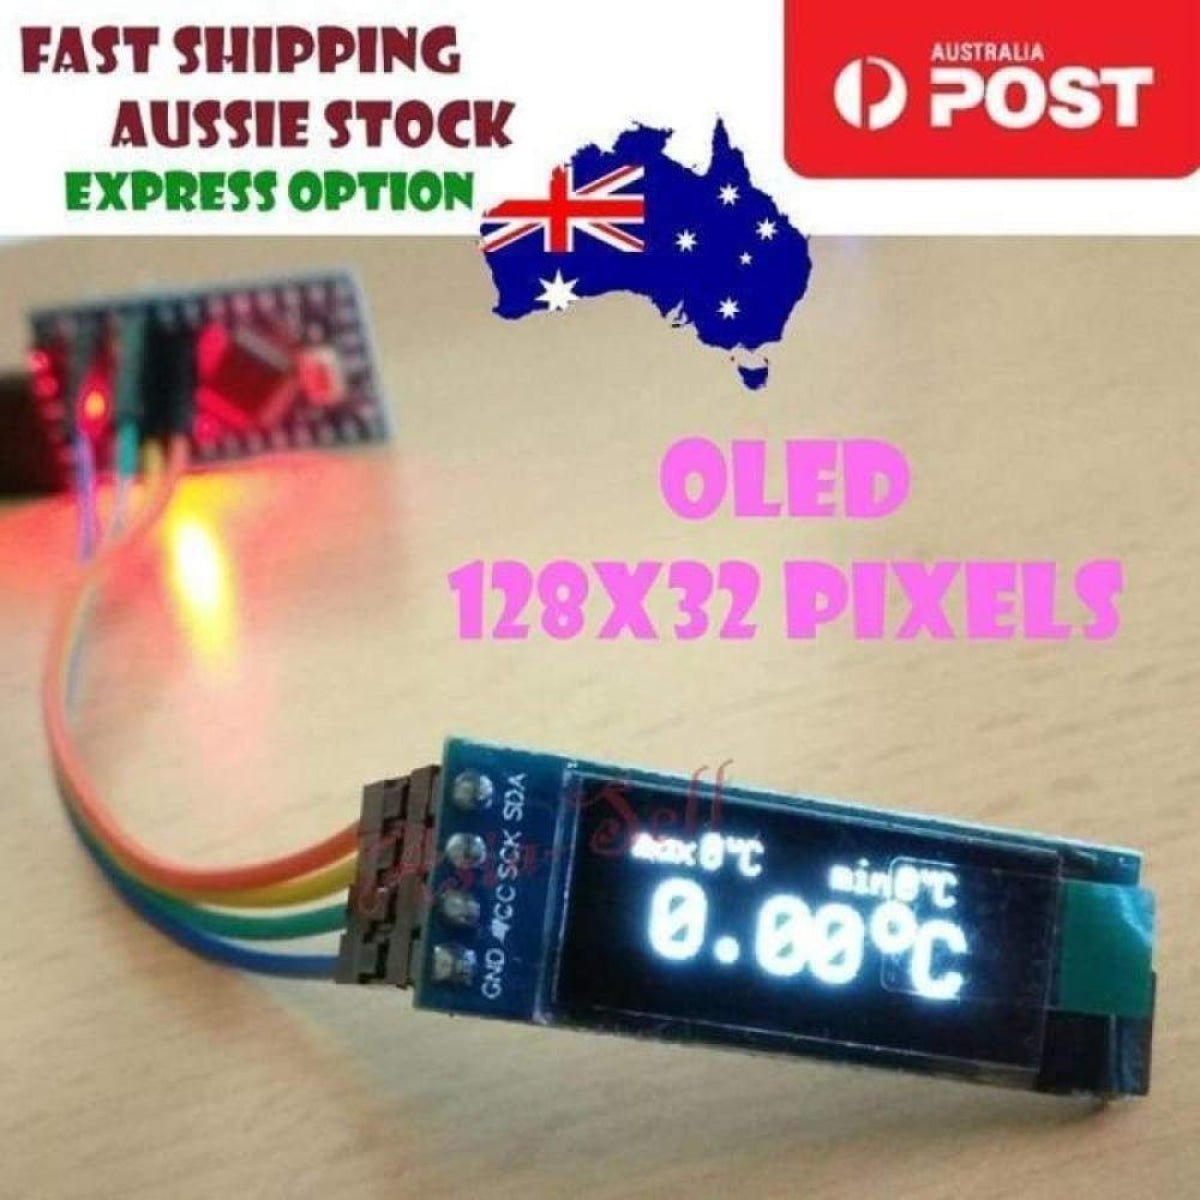 0.91" White Blue Background OLED Module 128X32 Display 0.91 inch - White - - Asia Sell